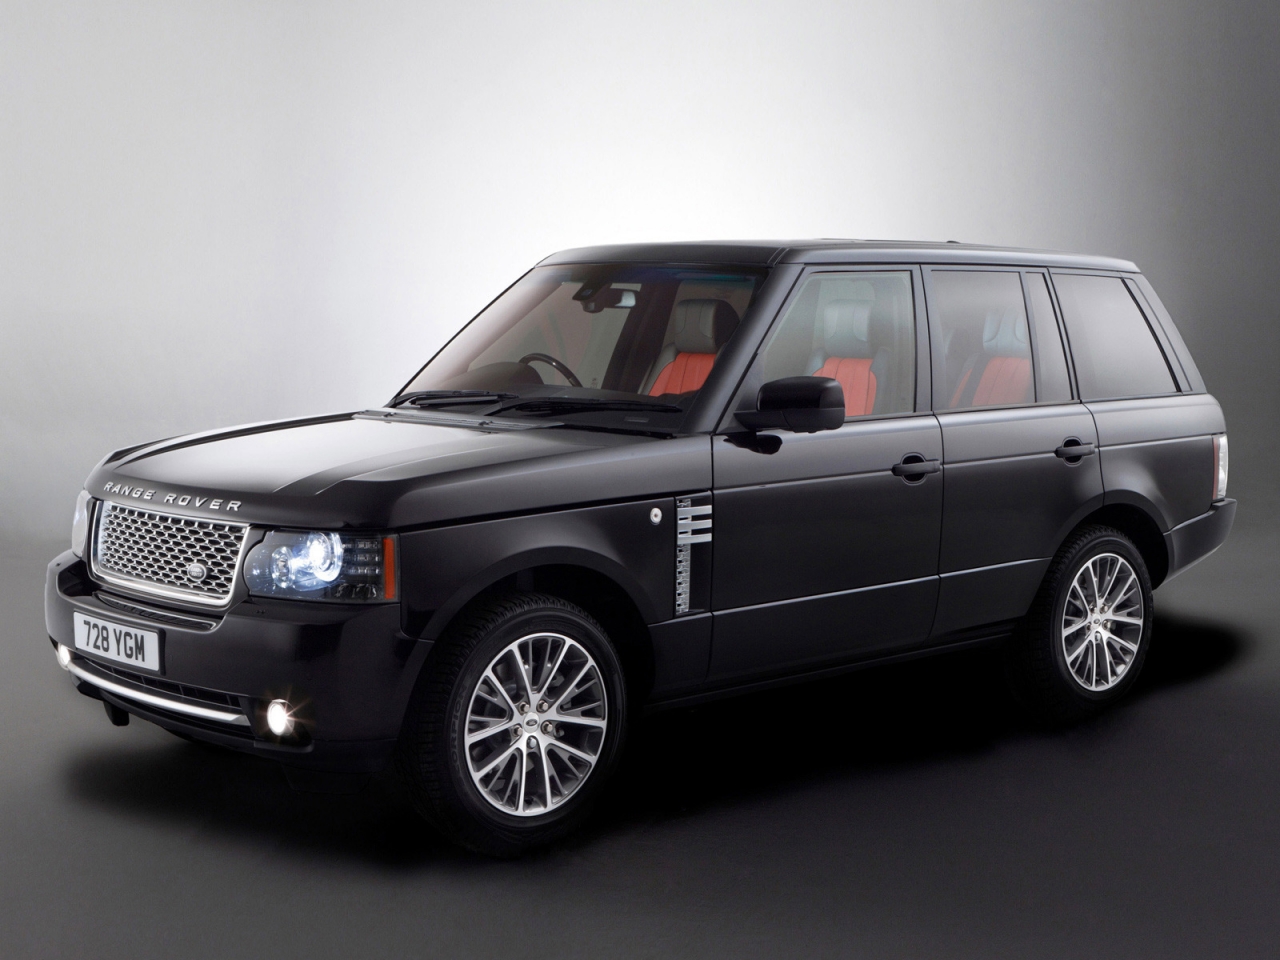 Range Rover Autobiography Black for 1280 x 960 resolution